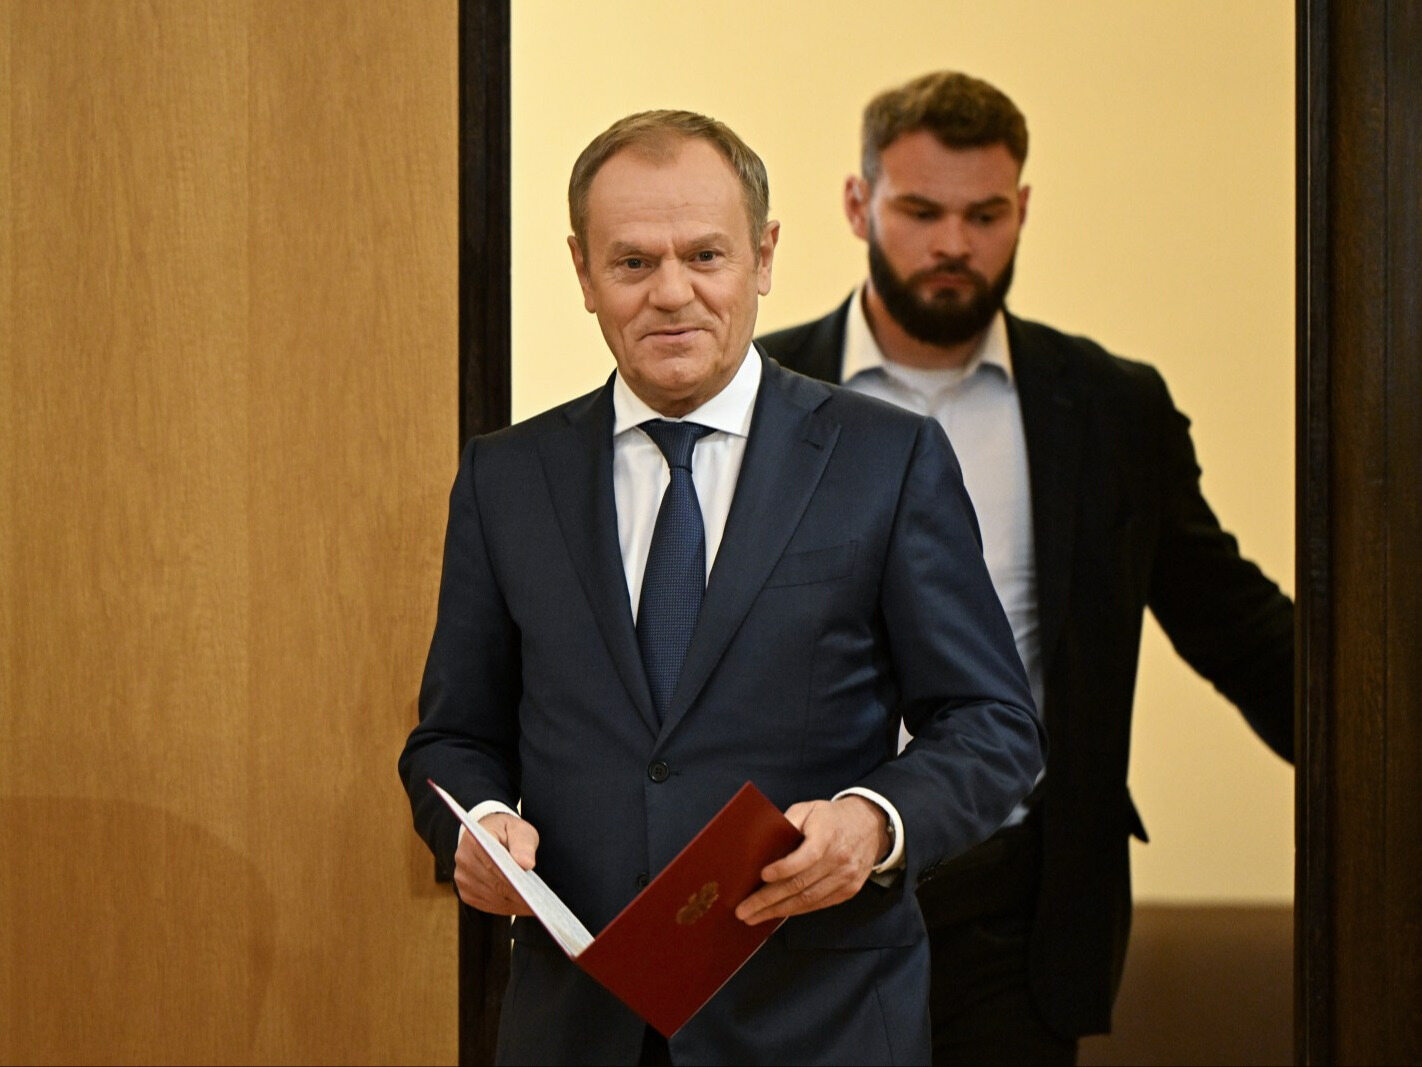 Donald Tusk responds to criticism.  "We are finishing the cleaning and speeding up"